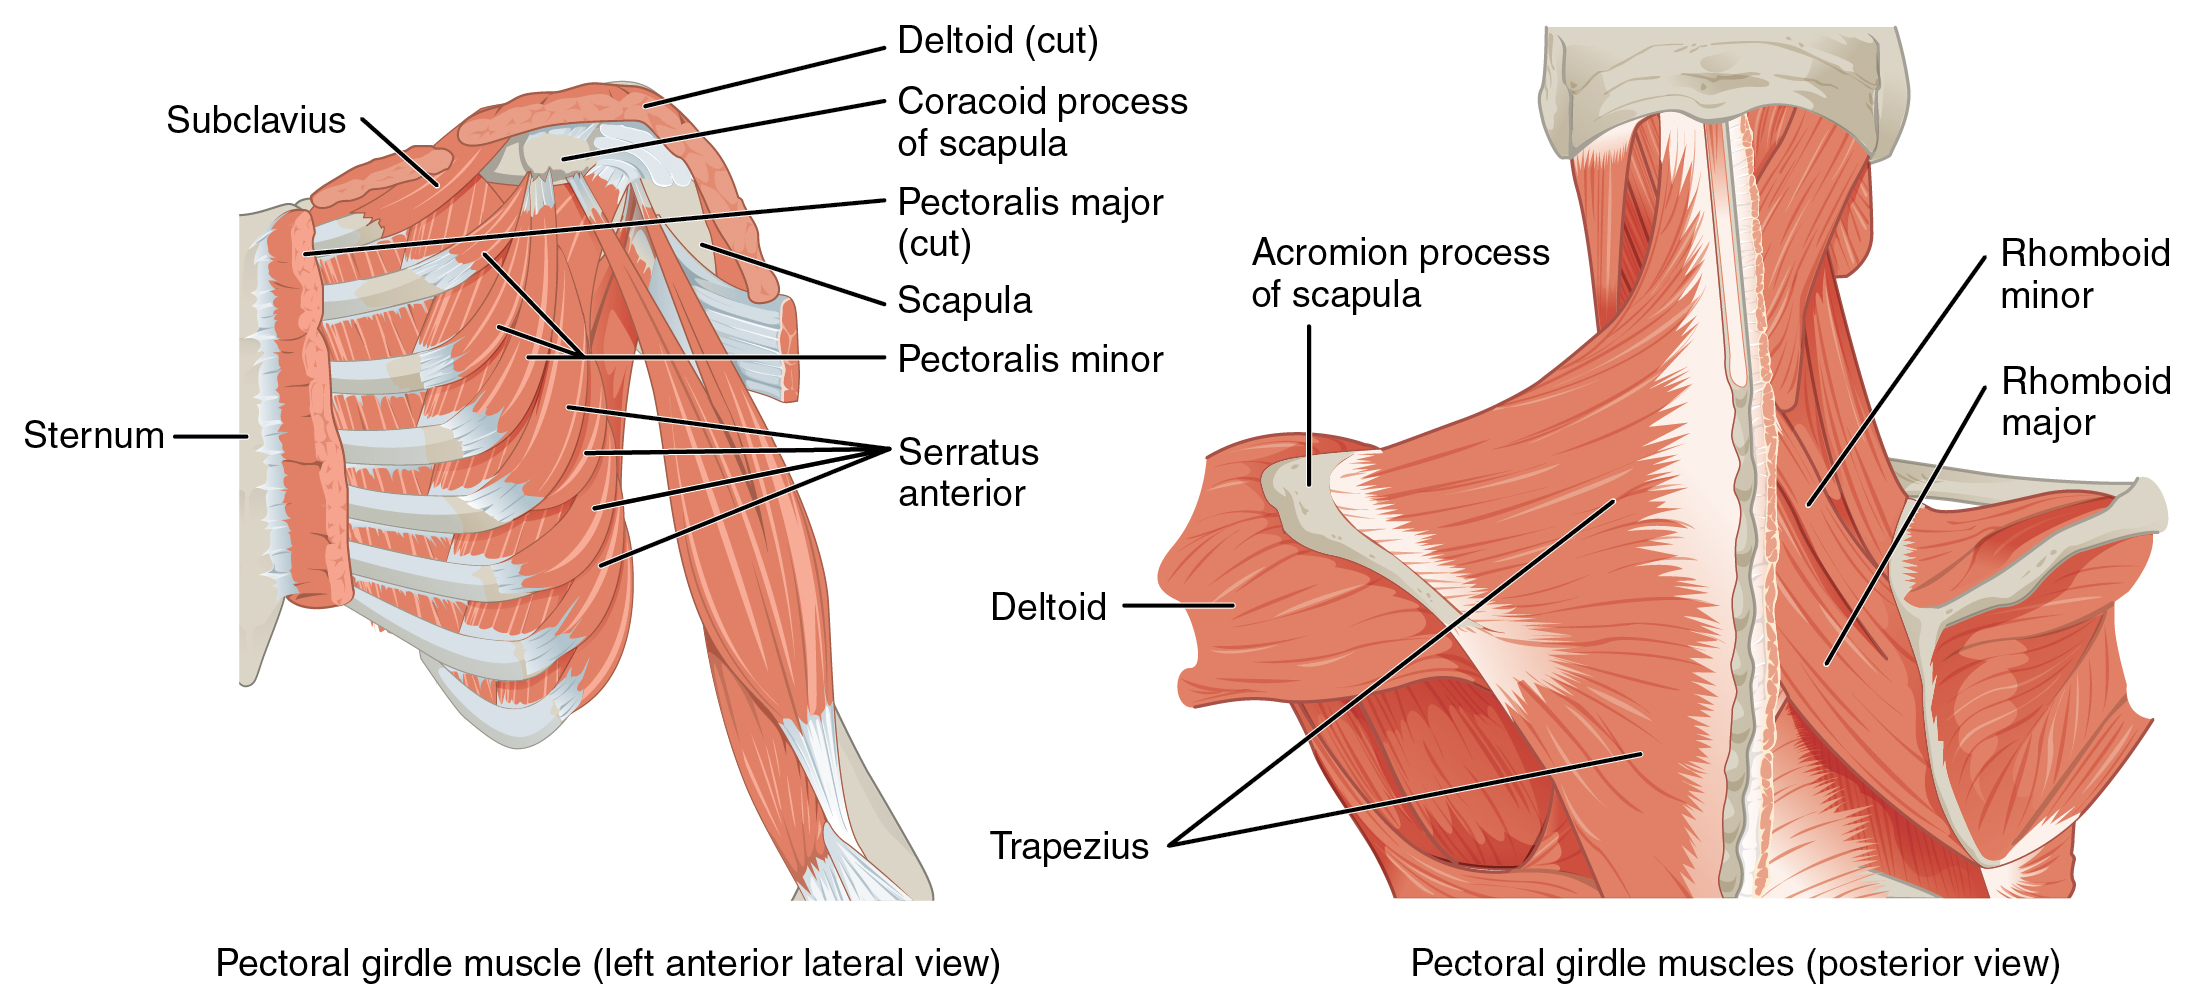 1118_Muscles_that_Position_the_Pectoral_Girdle.jpg